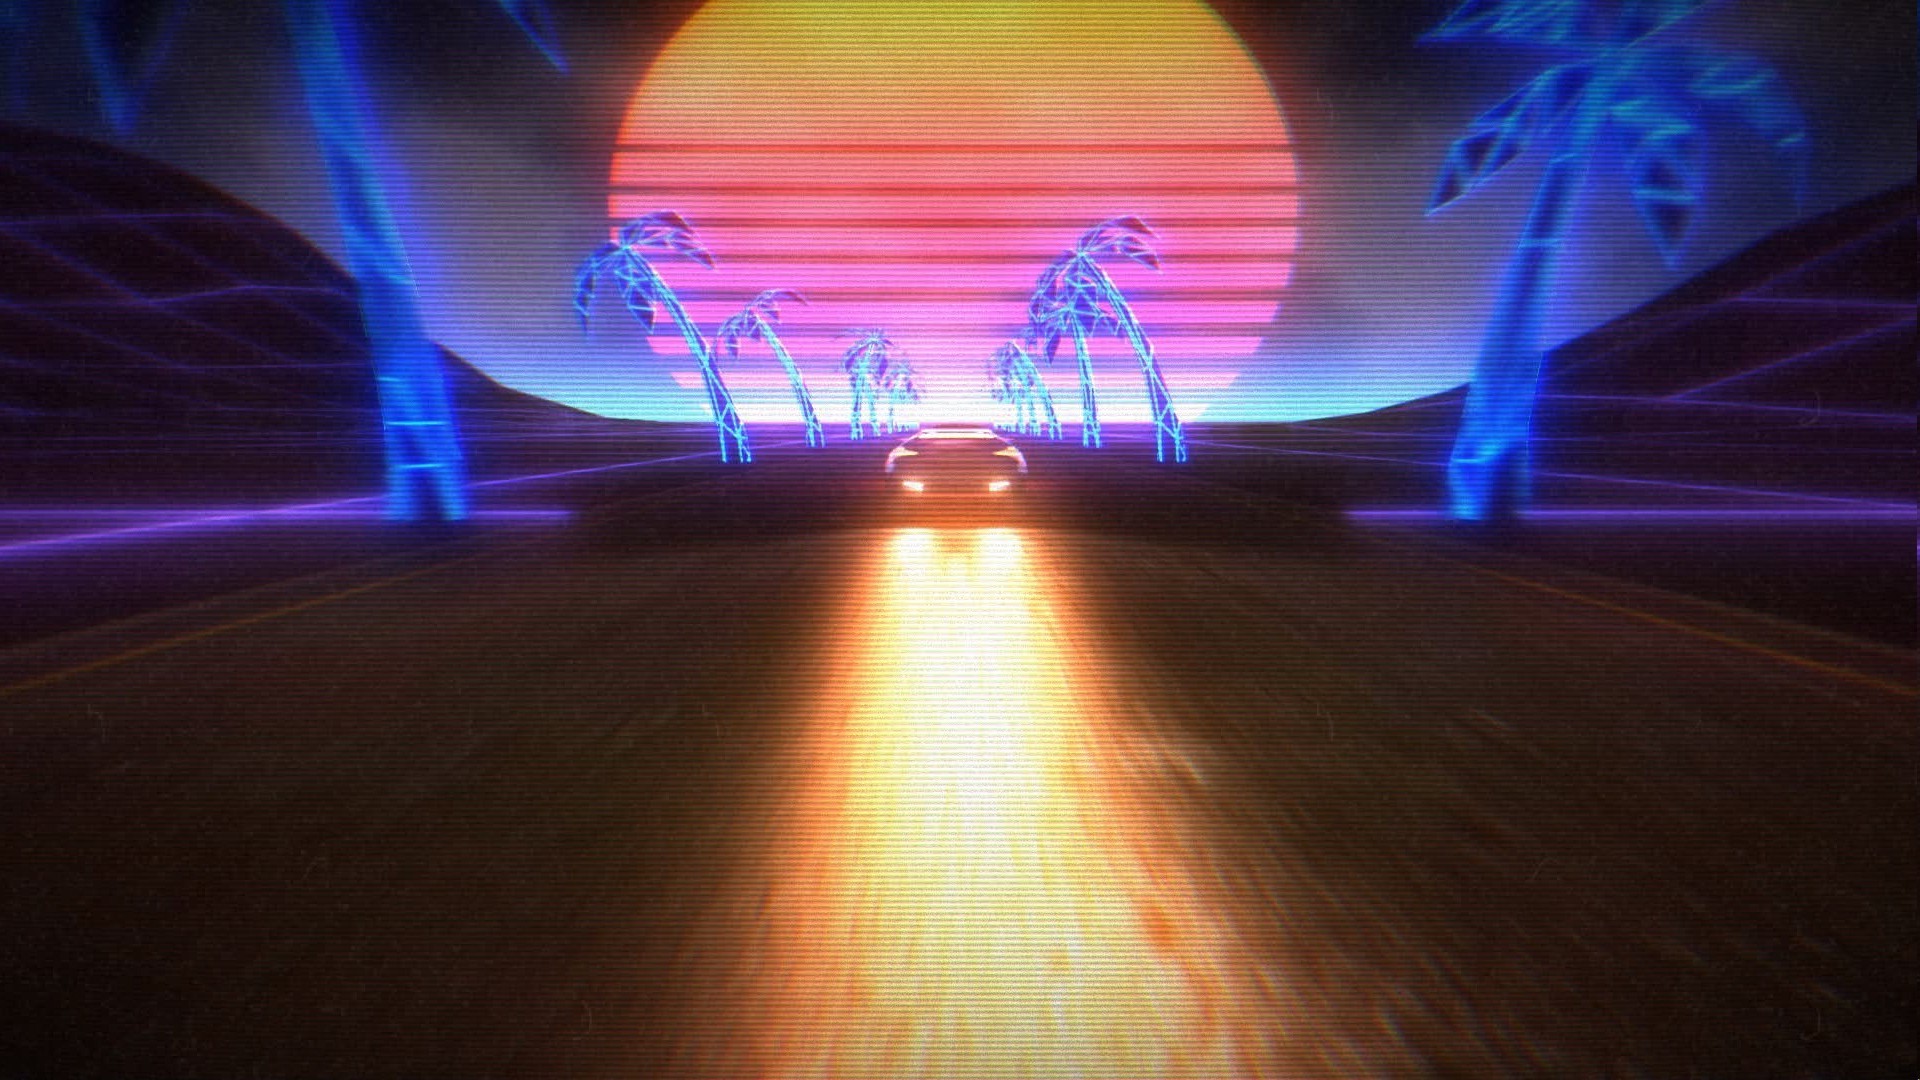 New Retro Wave, Synthwave, 1980s, Neon, Car, Retro Games Wallpapers HD